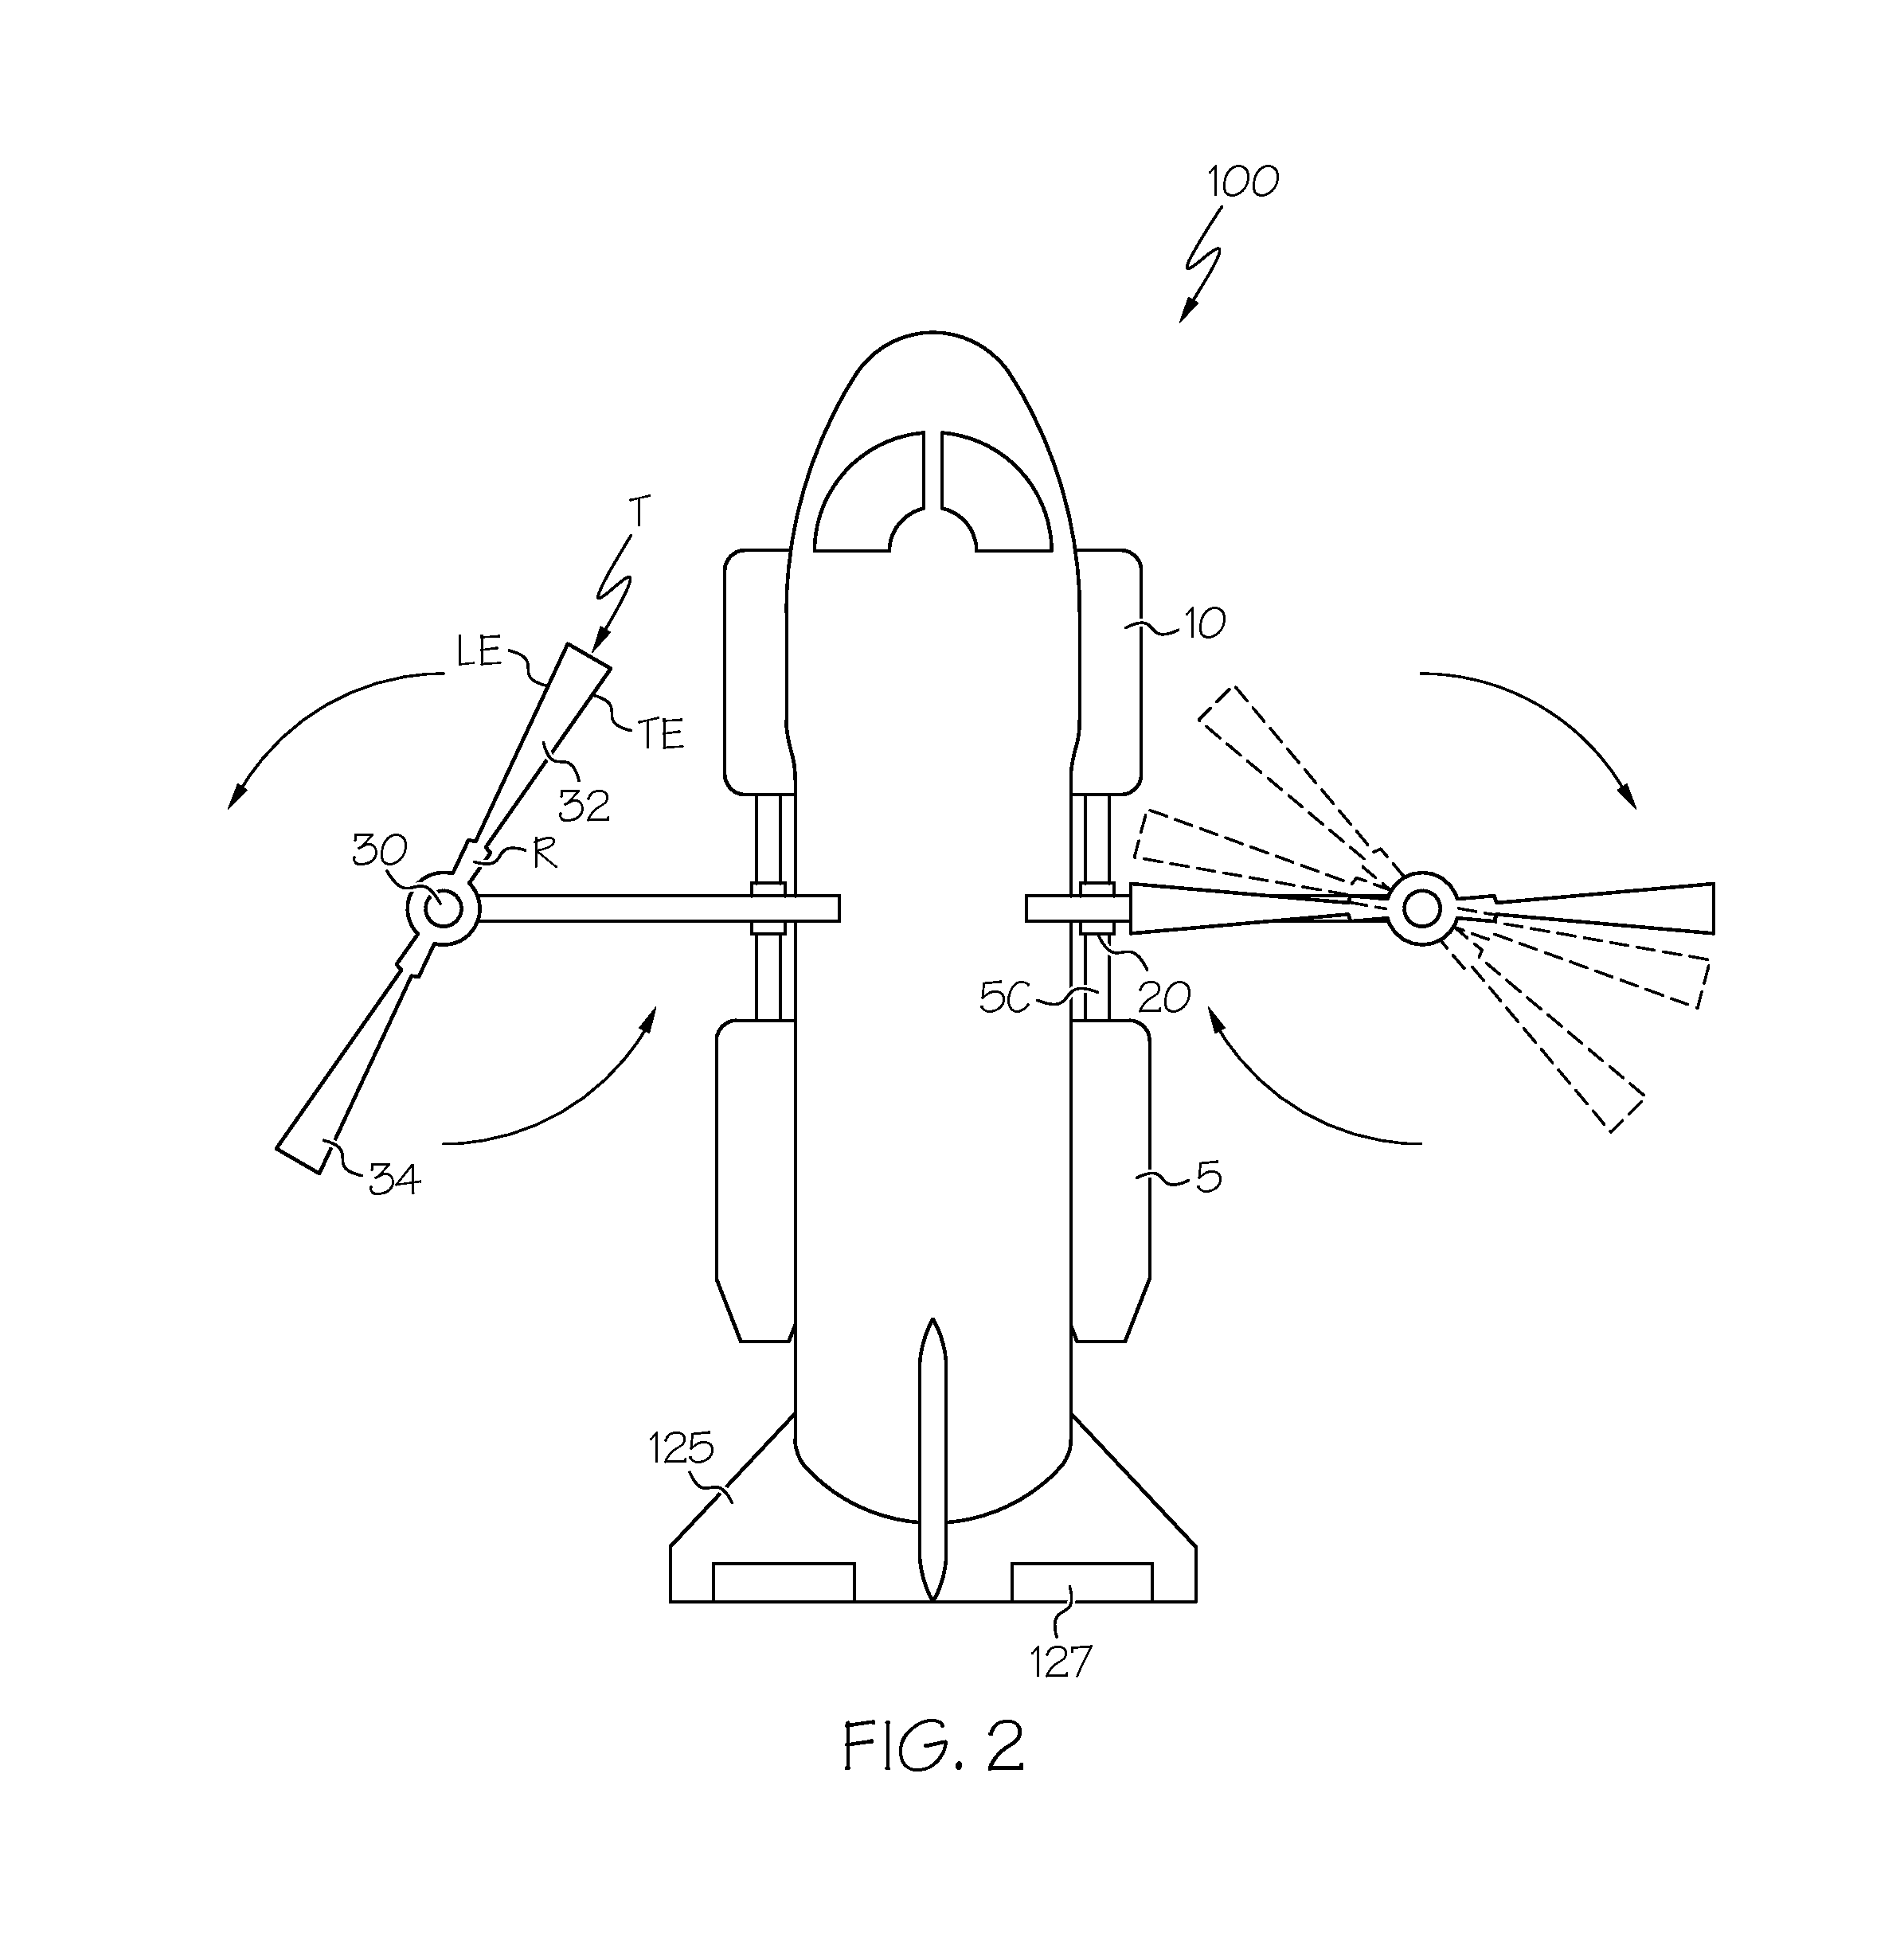 Aircraft using turbo-electric hybrid propulsion system for multi-mode operation